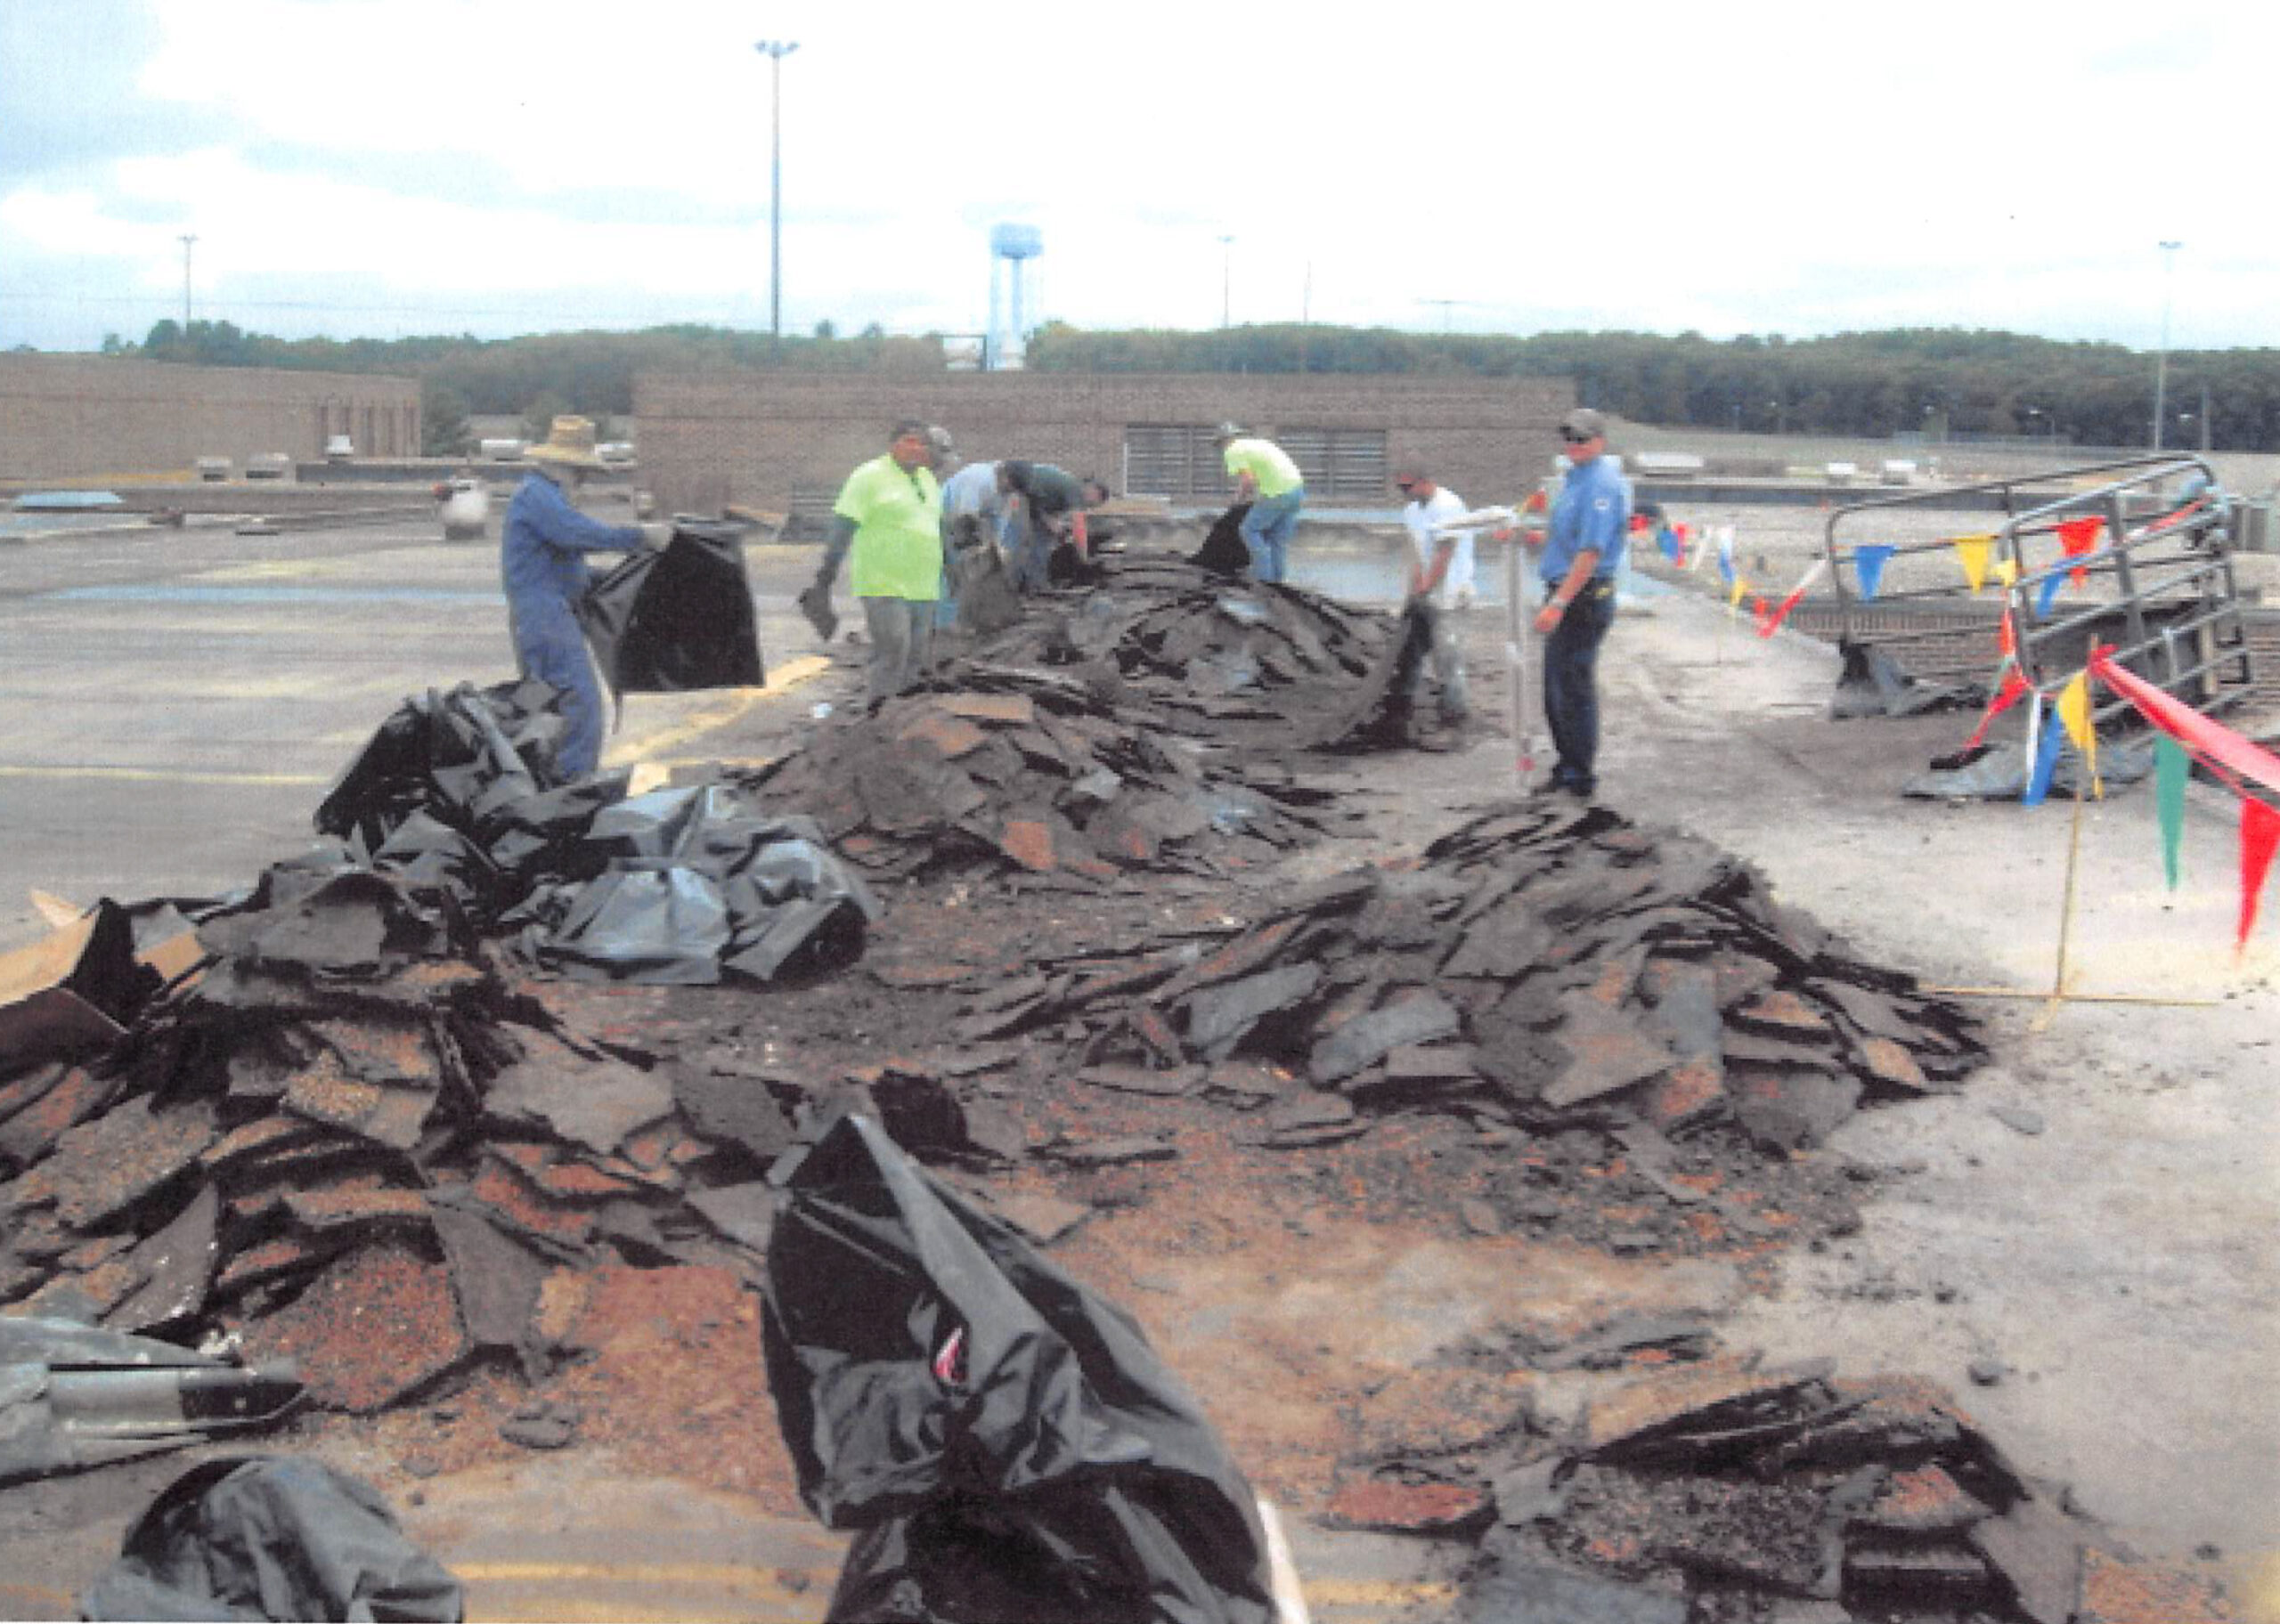 Brazos Urethane, Inc., employees move debris during a 2015 roofing project in Oxford